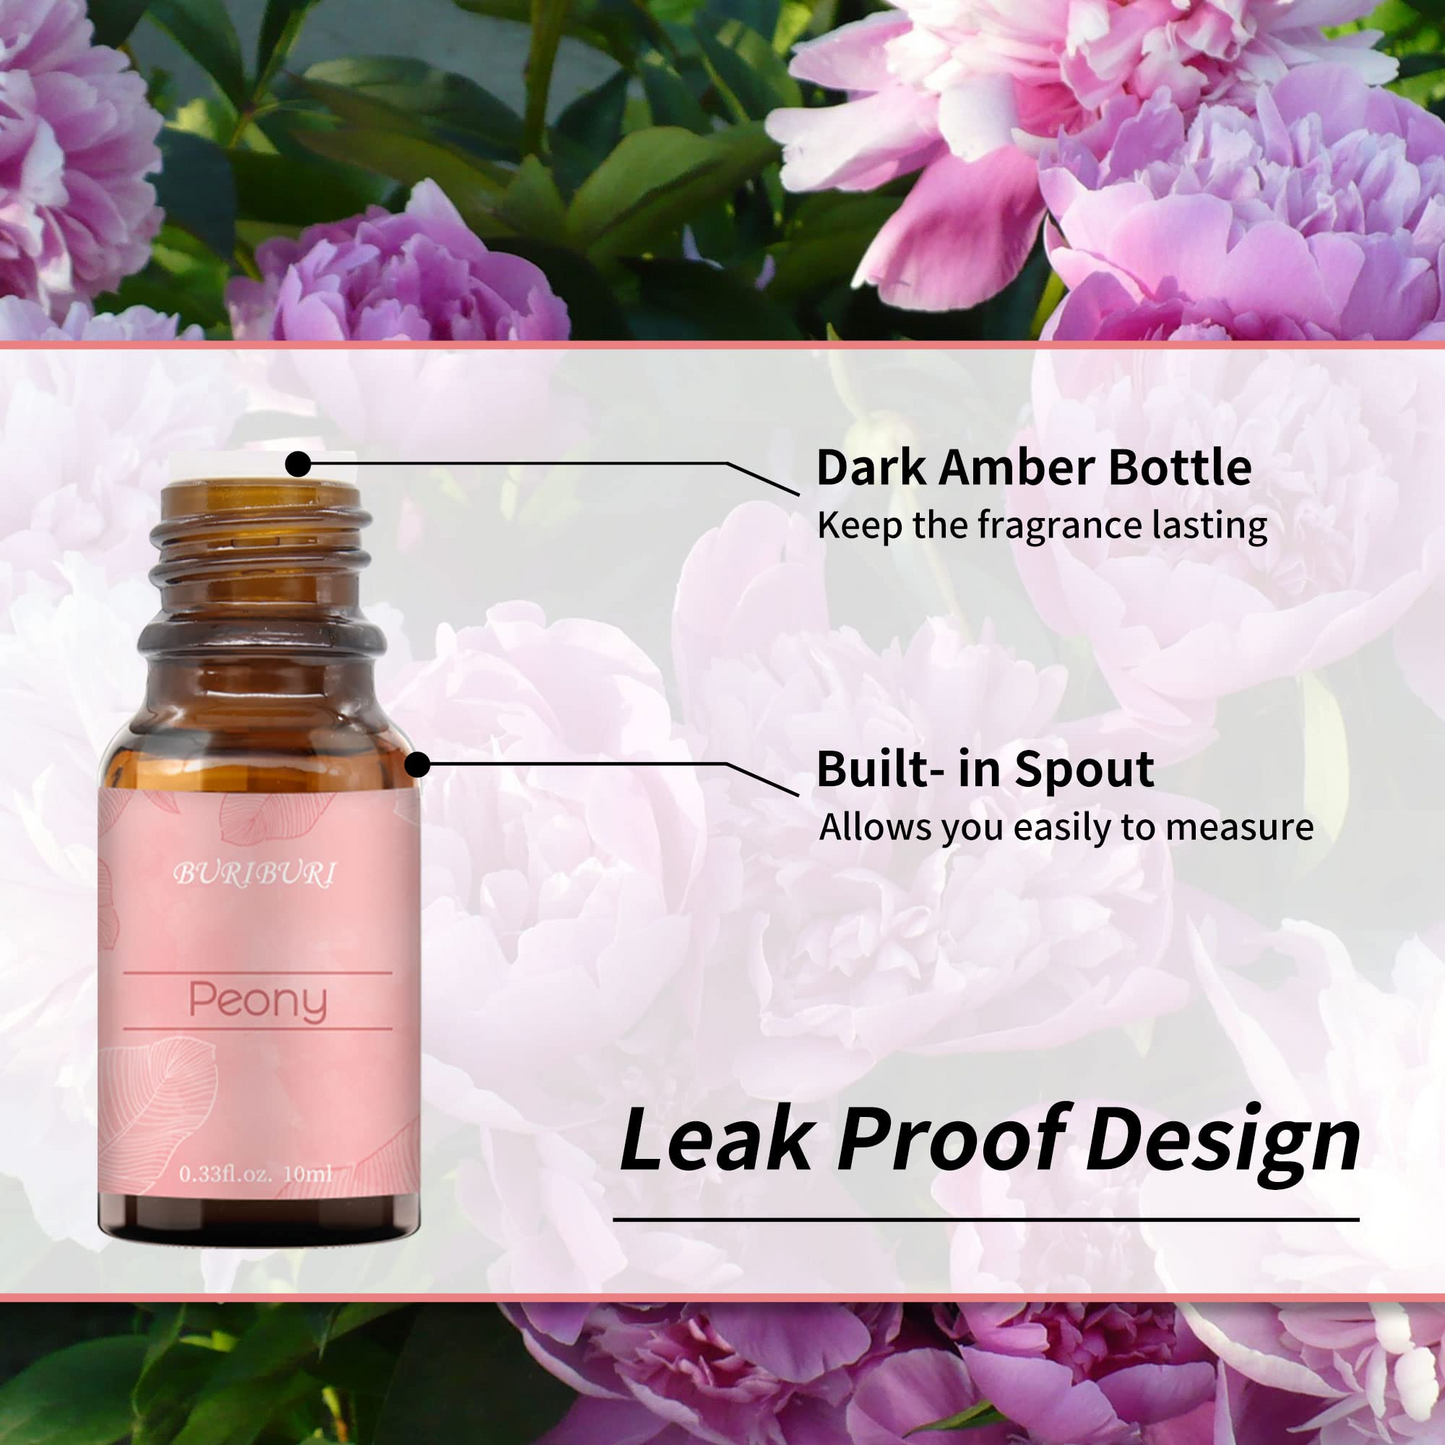 Rose and Peony Essential Oil Set 2 Pack